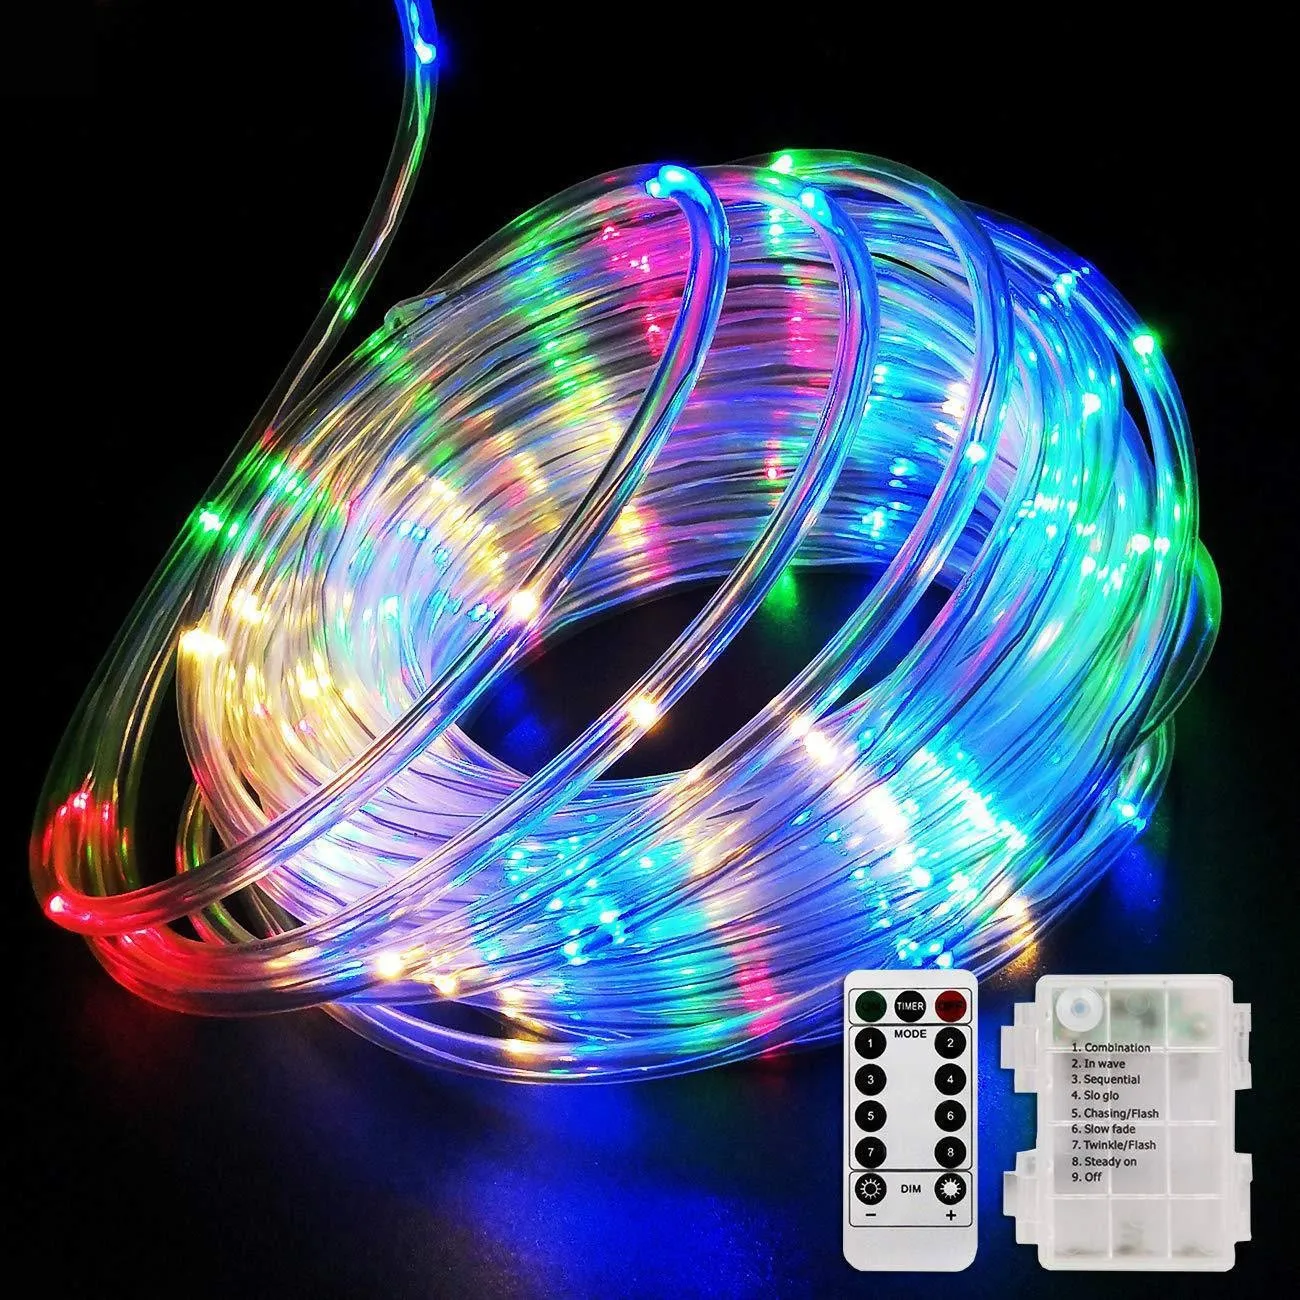 Battery Case Waterproof Telecontrol Outdoor Tube Lighting Strings 100/2000Lamp 8Modes For Yard Garden Decortion Party Holiday